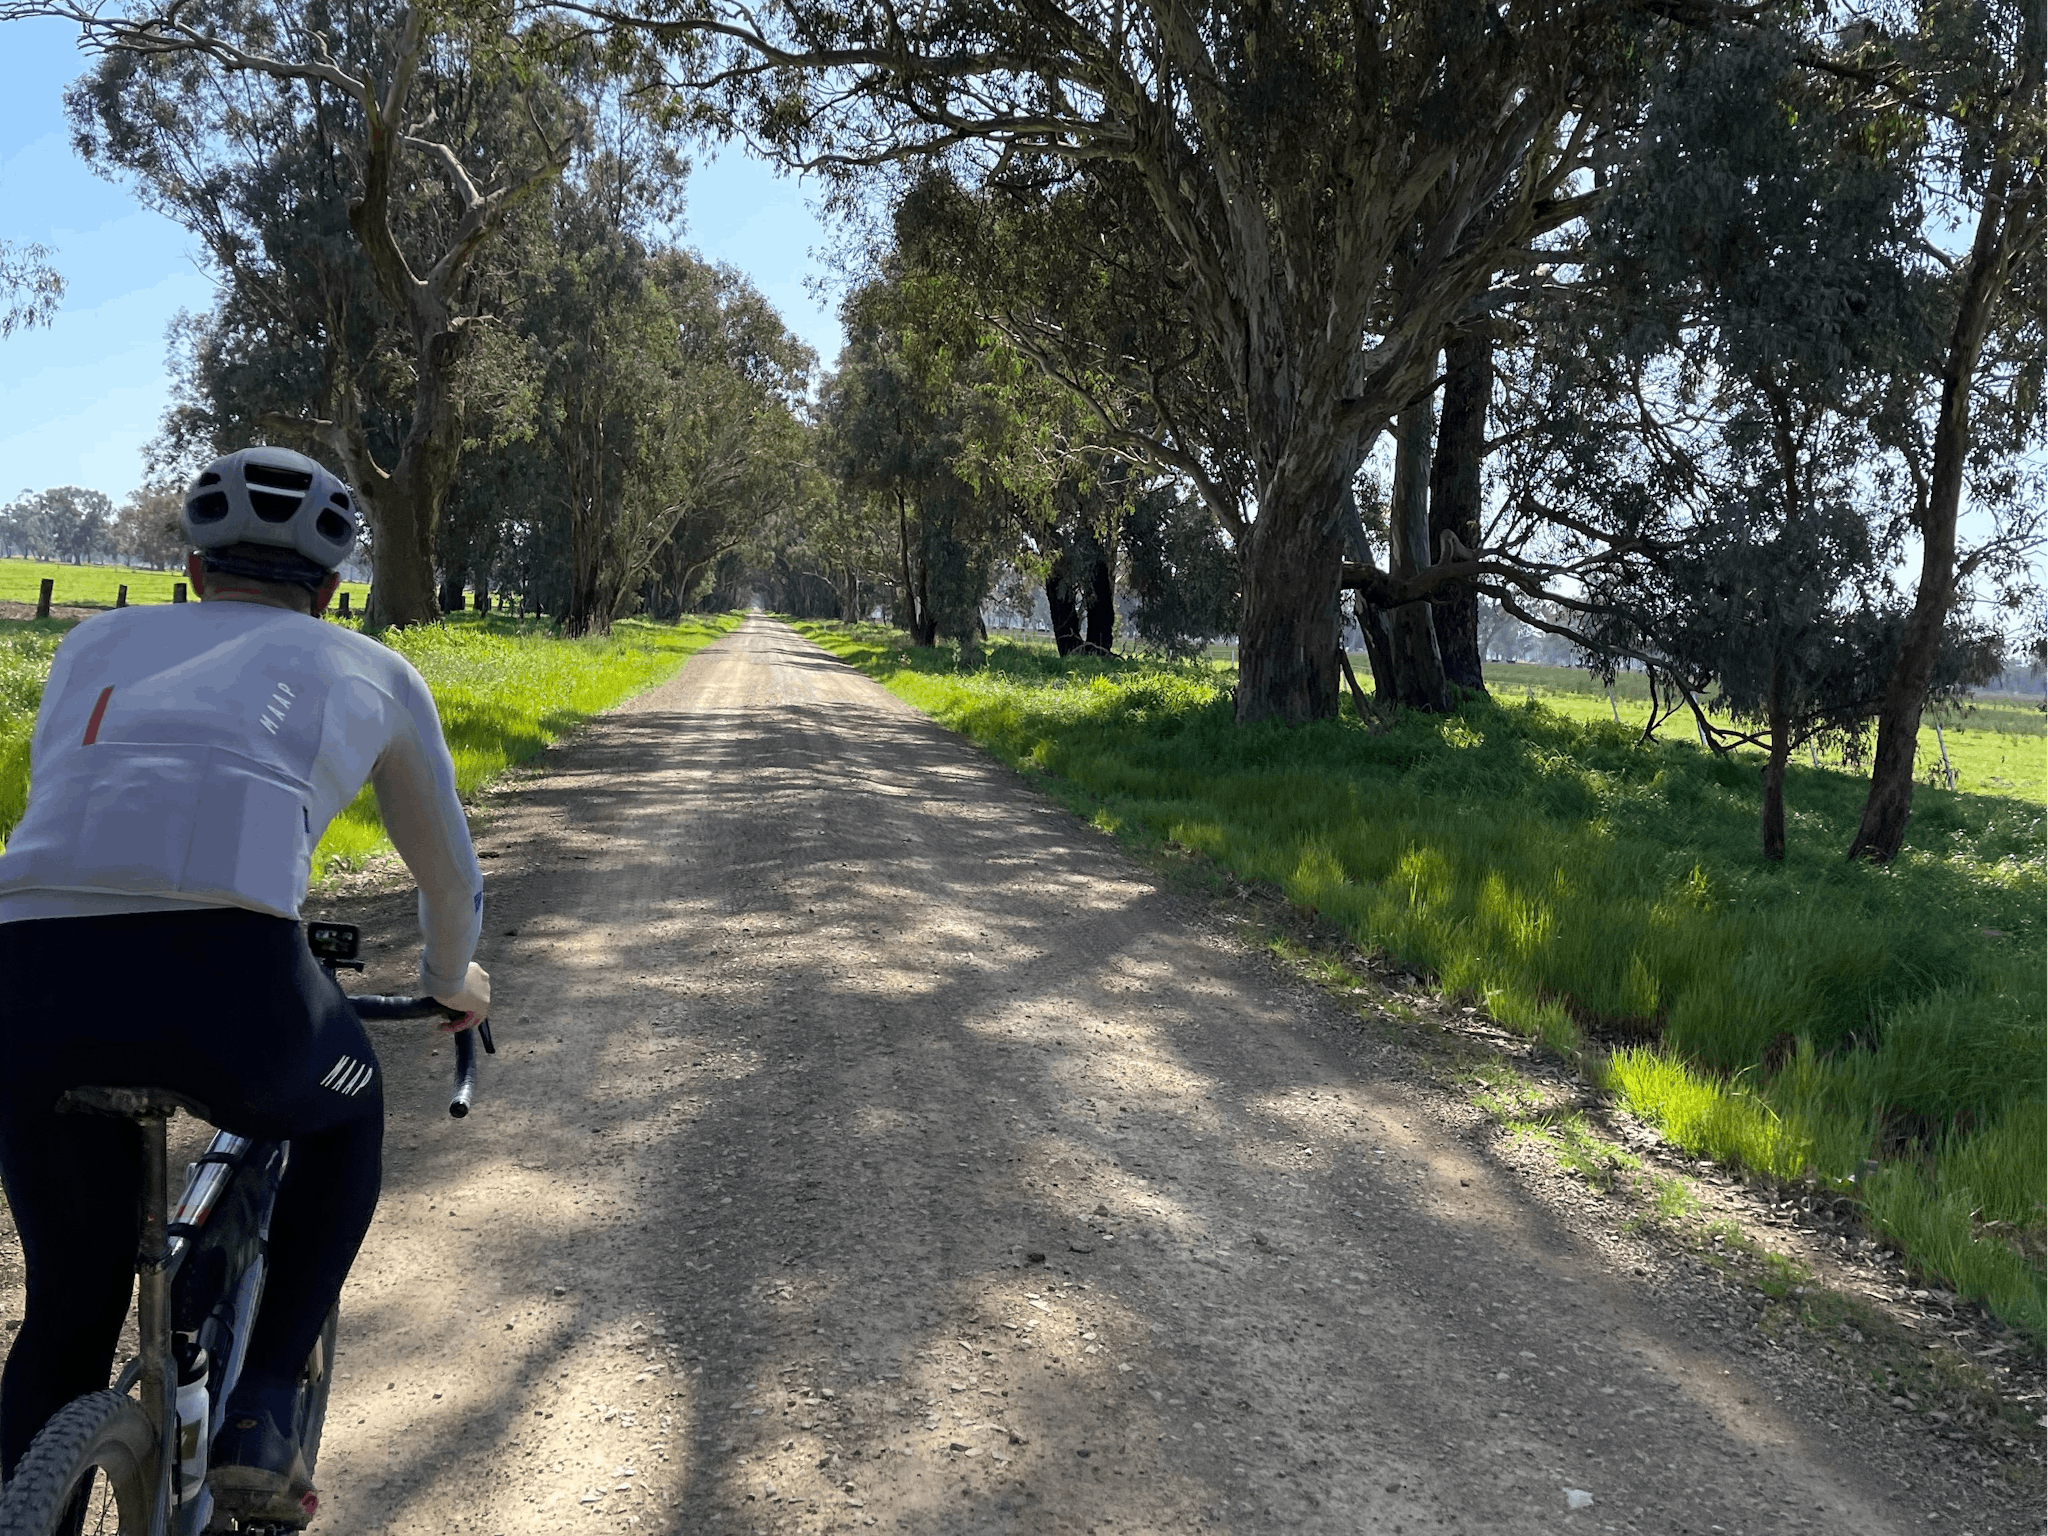 Cyclist on dull brown gravel road, grass, gum trees, blue sky